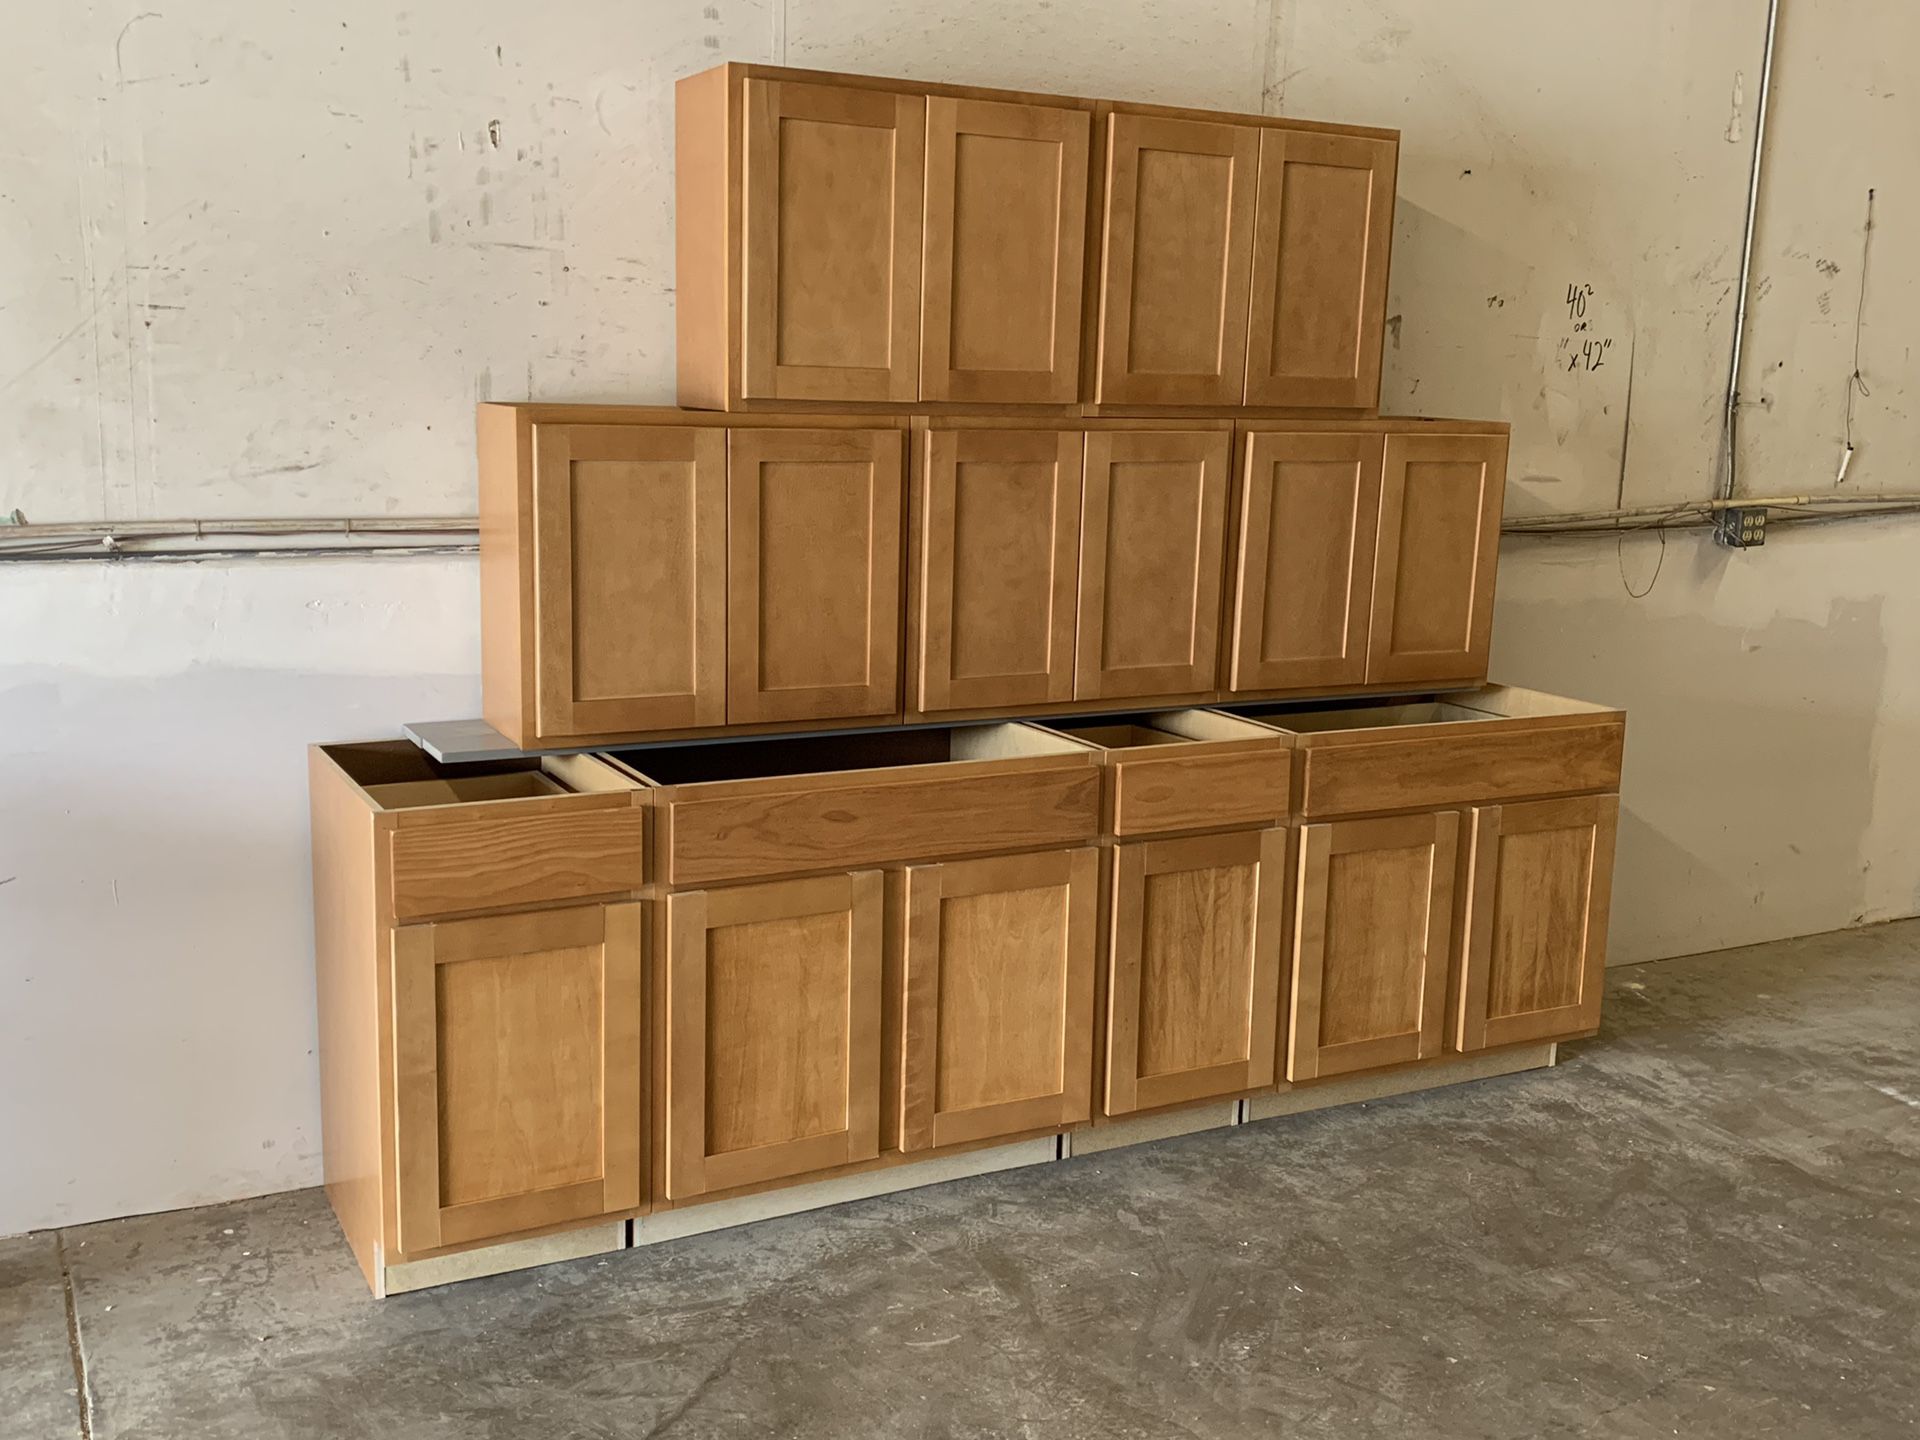 New kitchen cabinets 9 pieces set